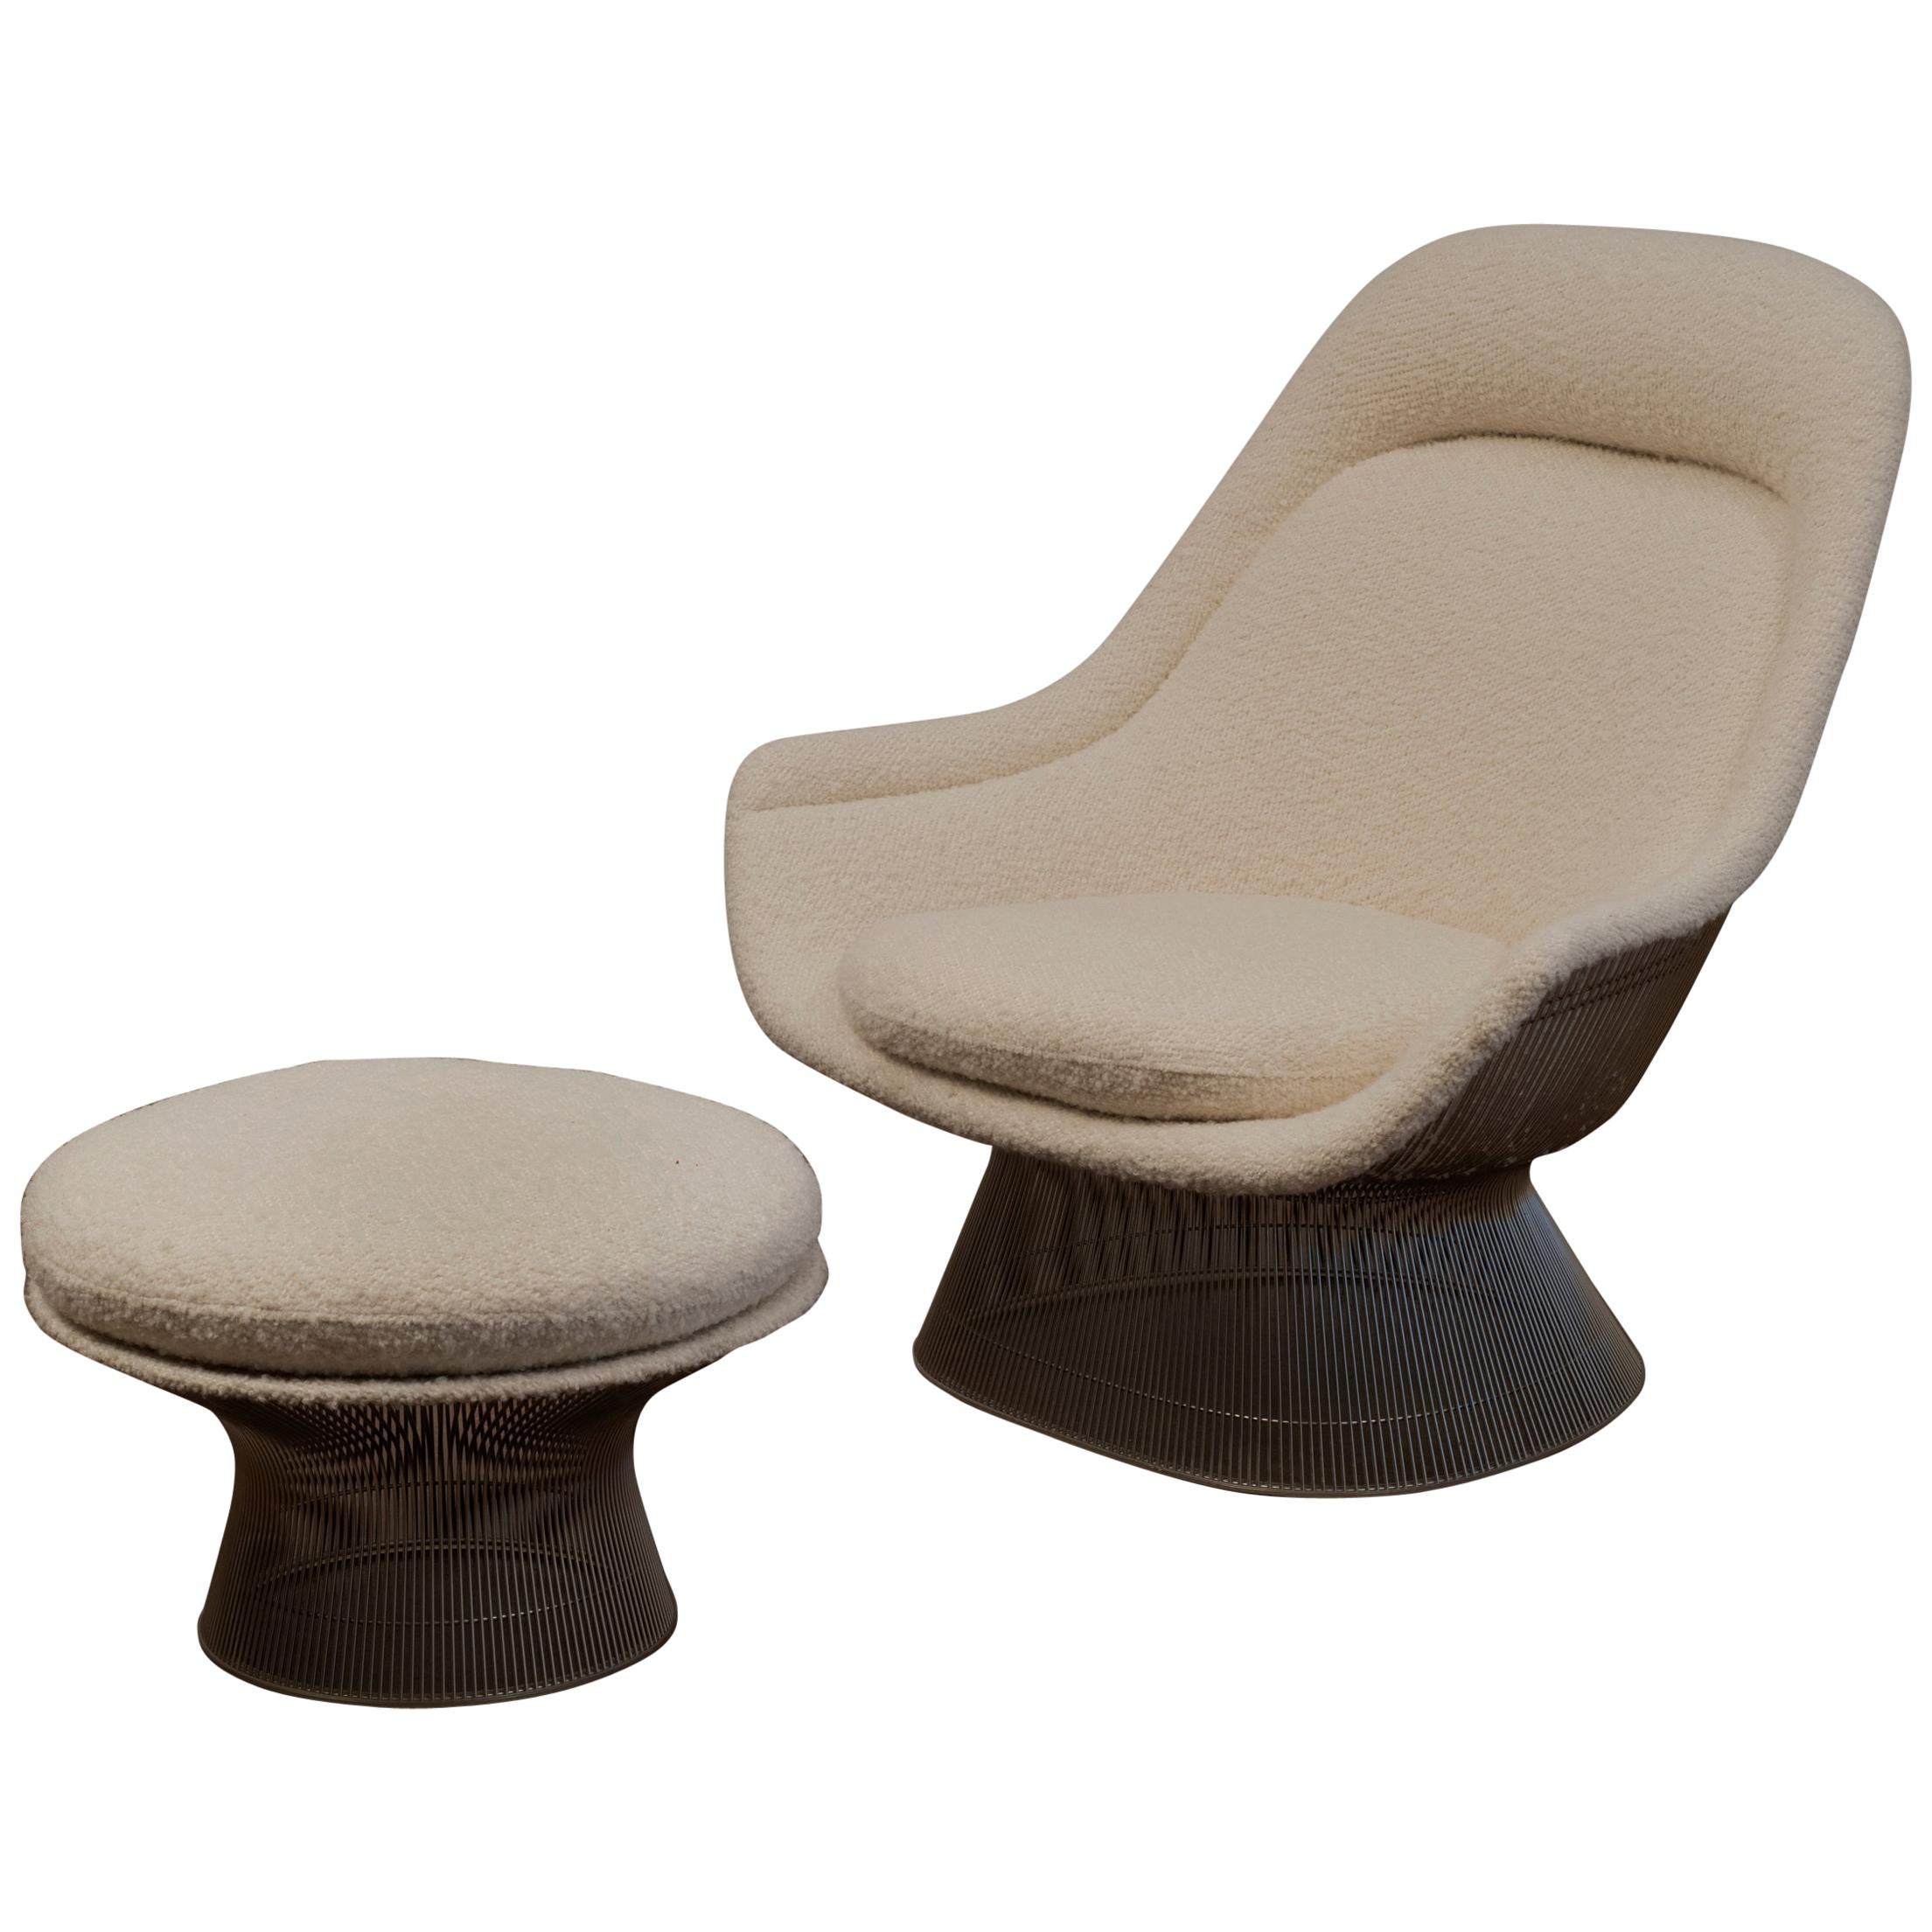 Warren Platner Lounge Chair and Ottoman in Pierre Frey Boucle